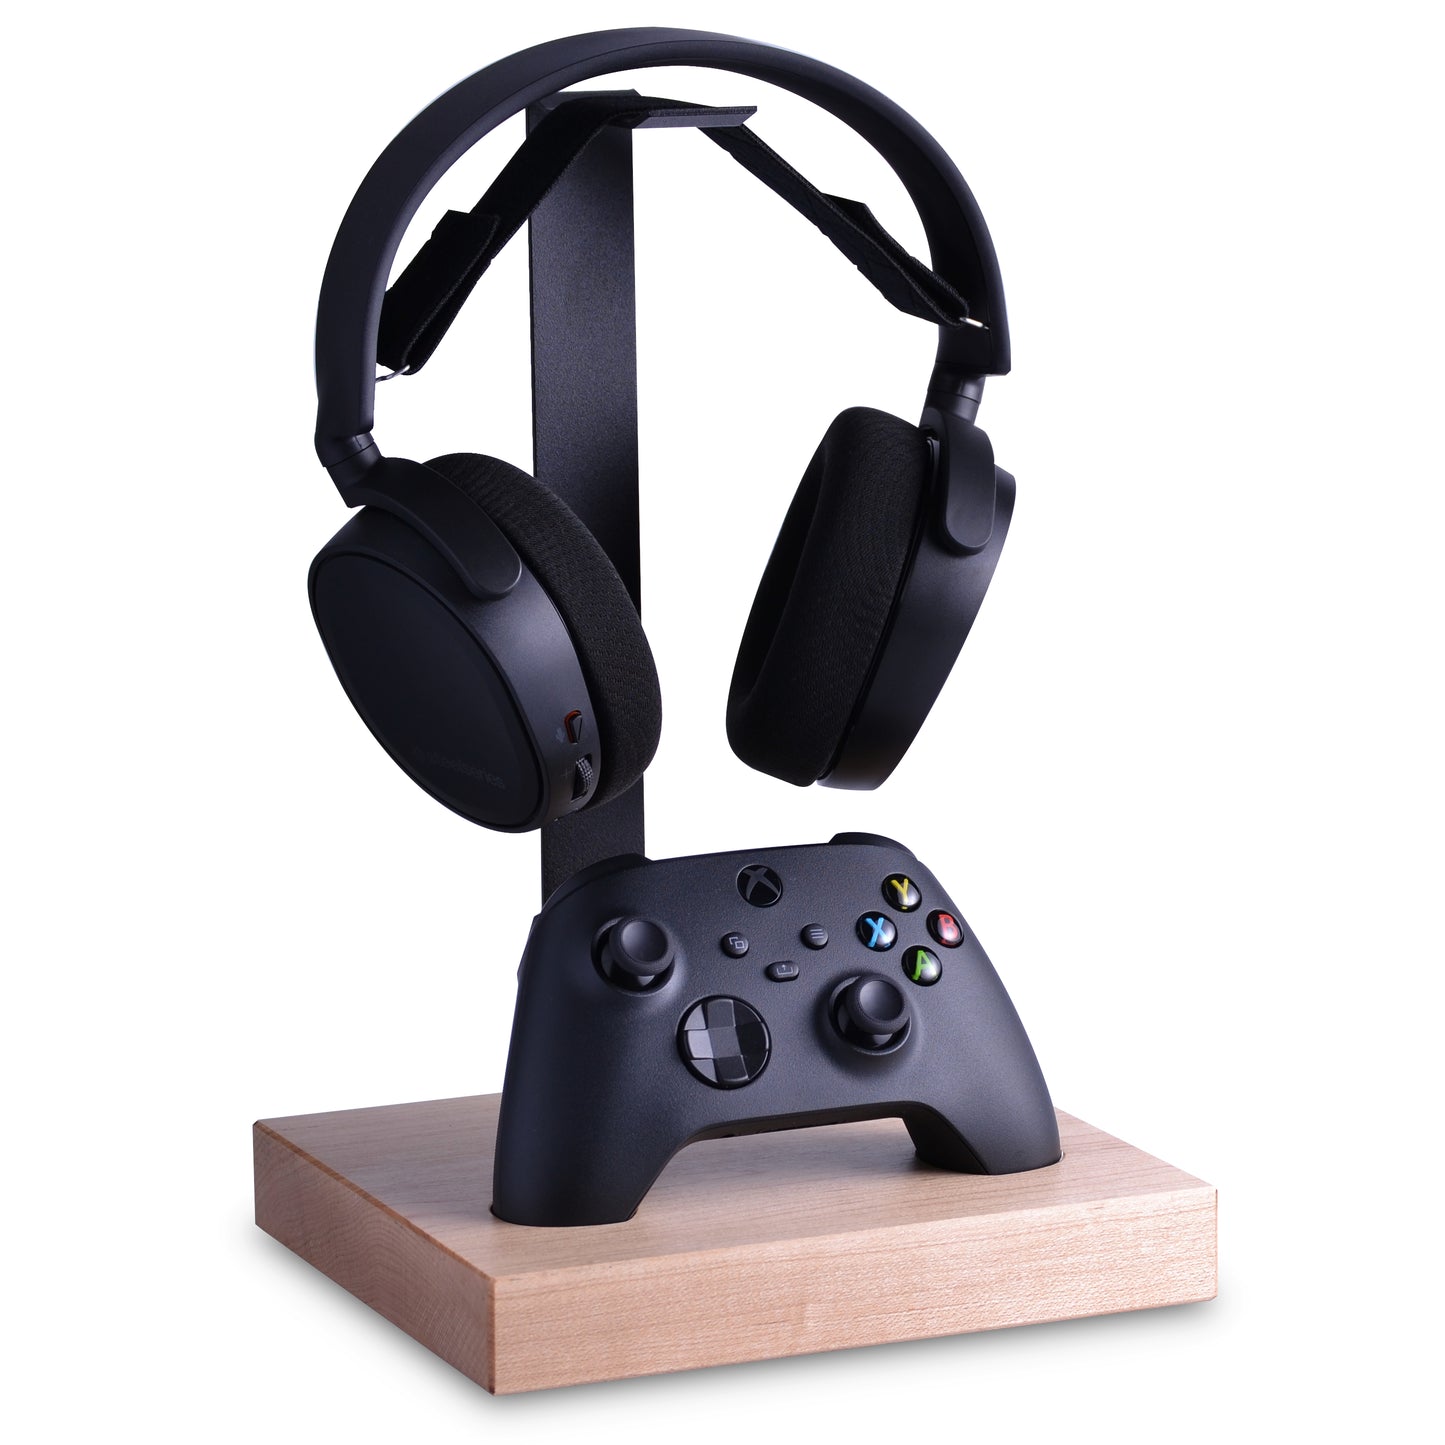 Wooden headset and controller stand for Xbox series X|S Controller